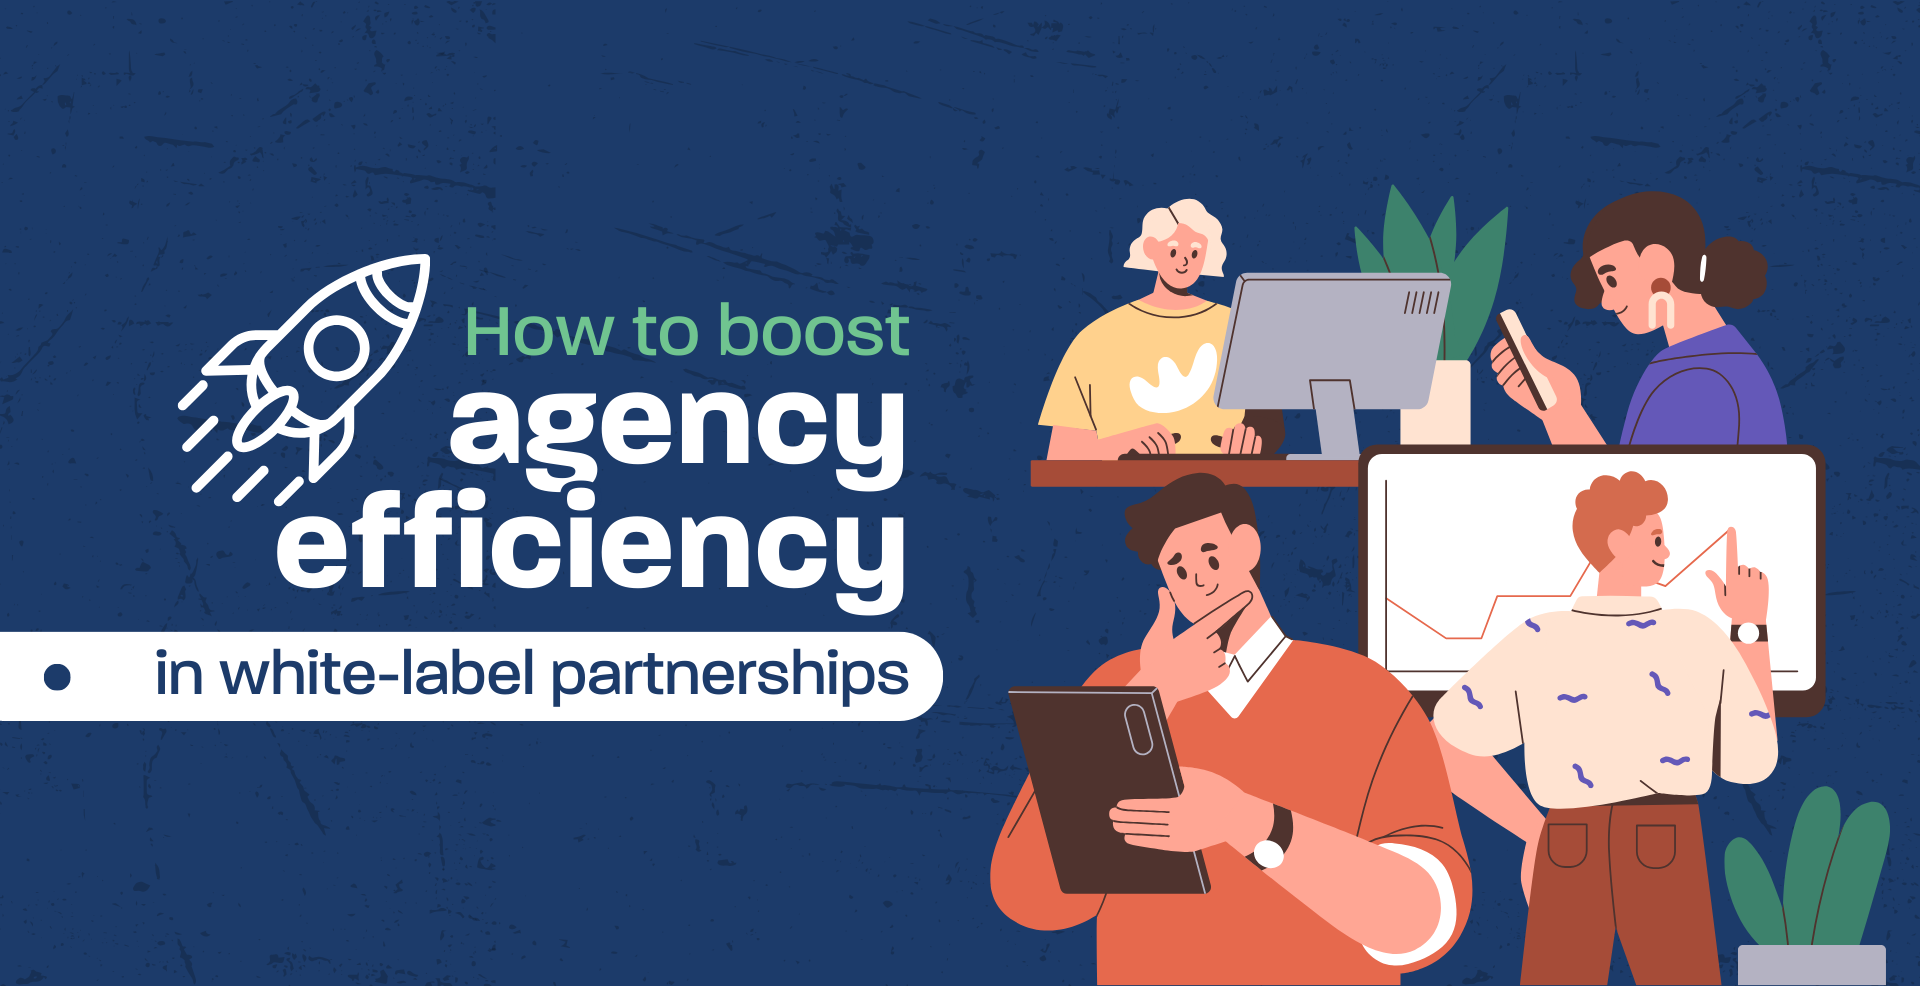 How to boost agency efficiency in a white-label partnership